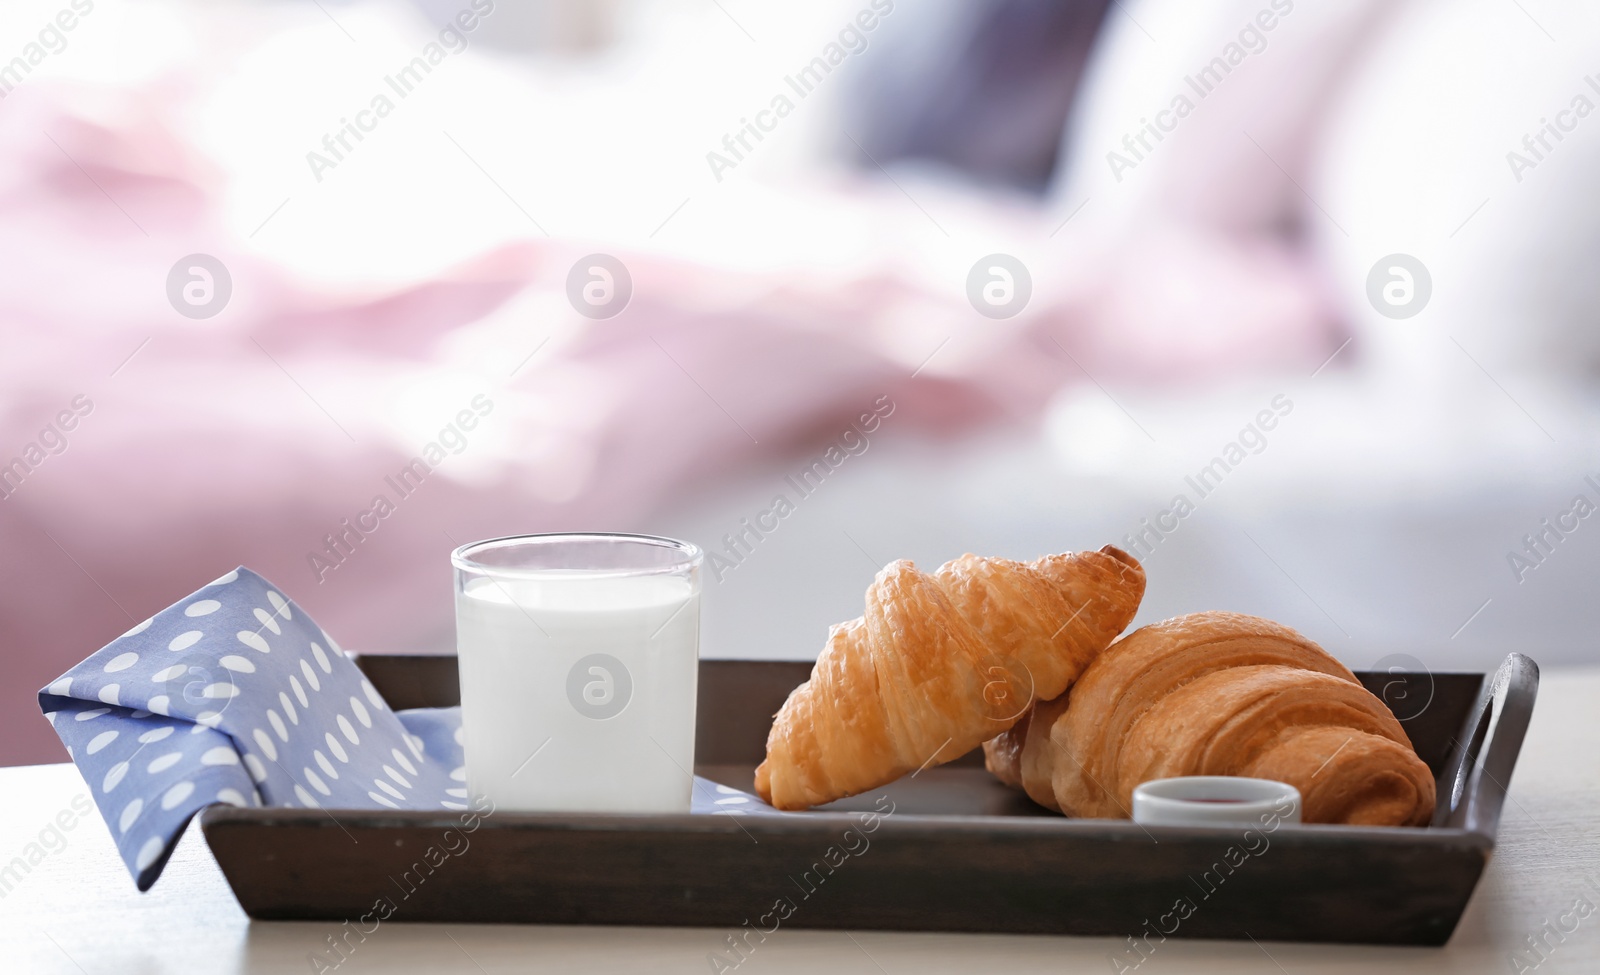 Photo of Wooden tray with tasty croissants and glass of milk on table